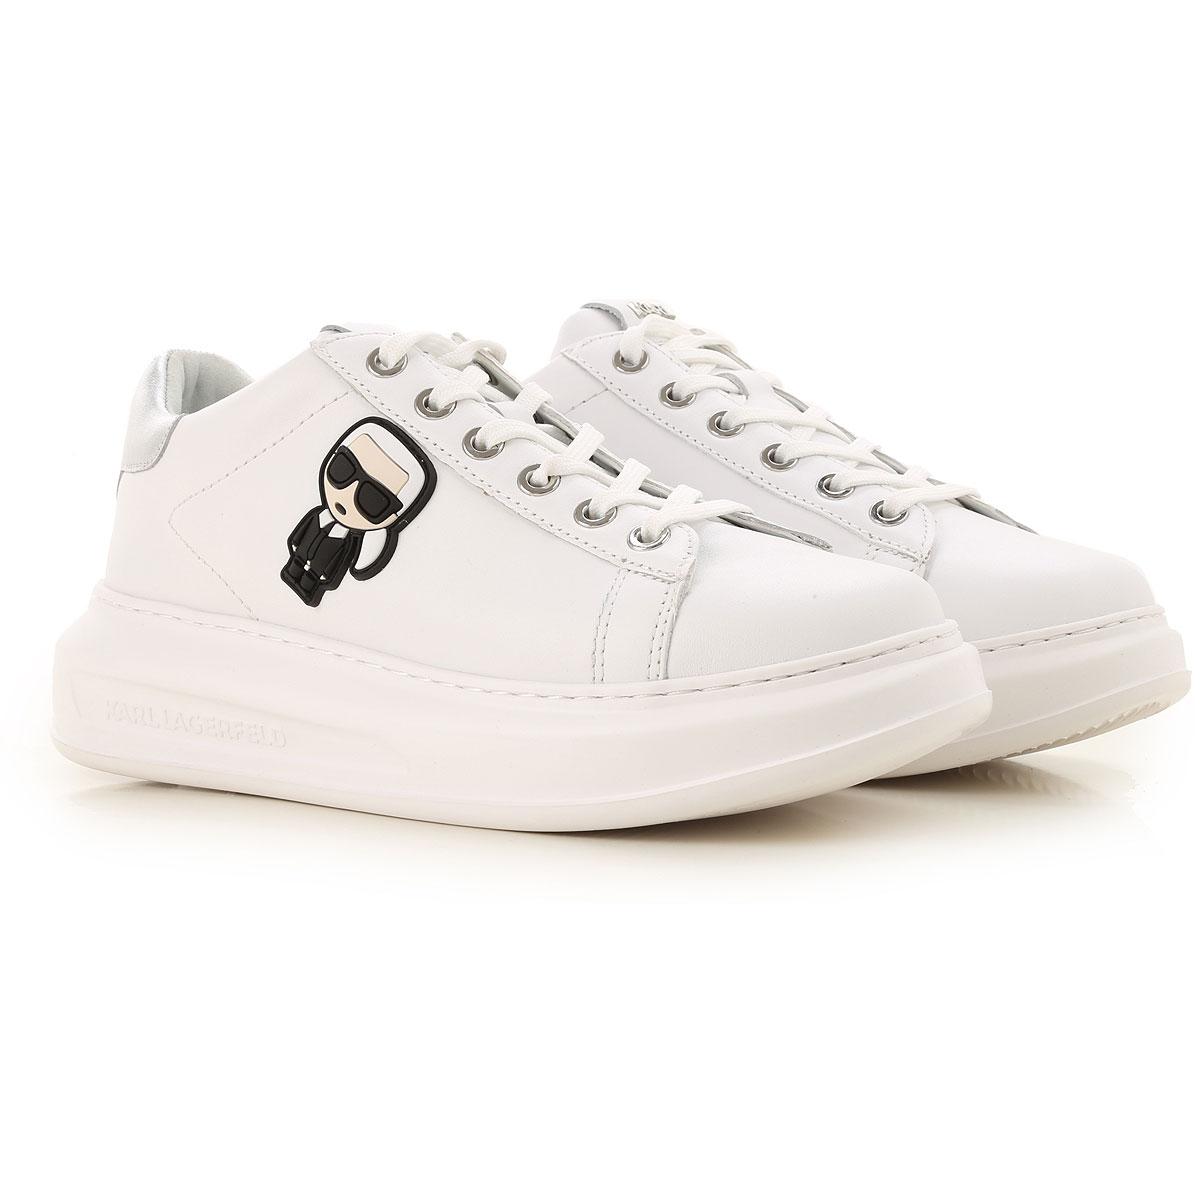 Karl Lagerfeld Sneakers For Women On Sale in White - Save 18% - Lyst